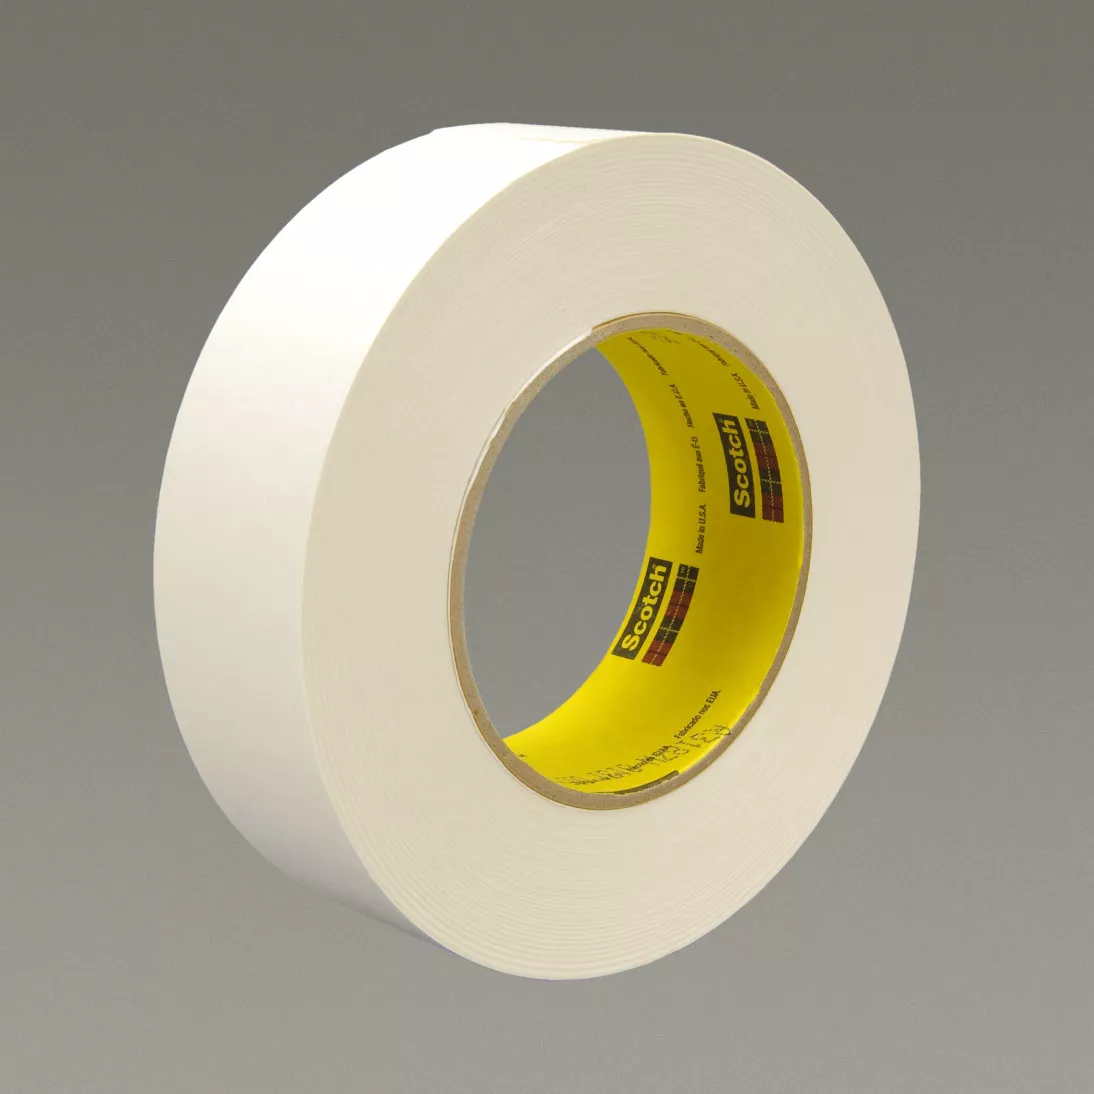 3M™ Repulpable Strong Single Coated Tape R3187, White, 96 mm x 55 m, 7.5
mil, 8 rolls per case